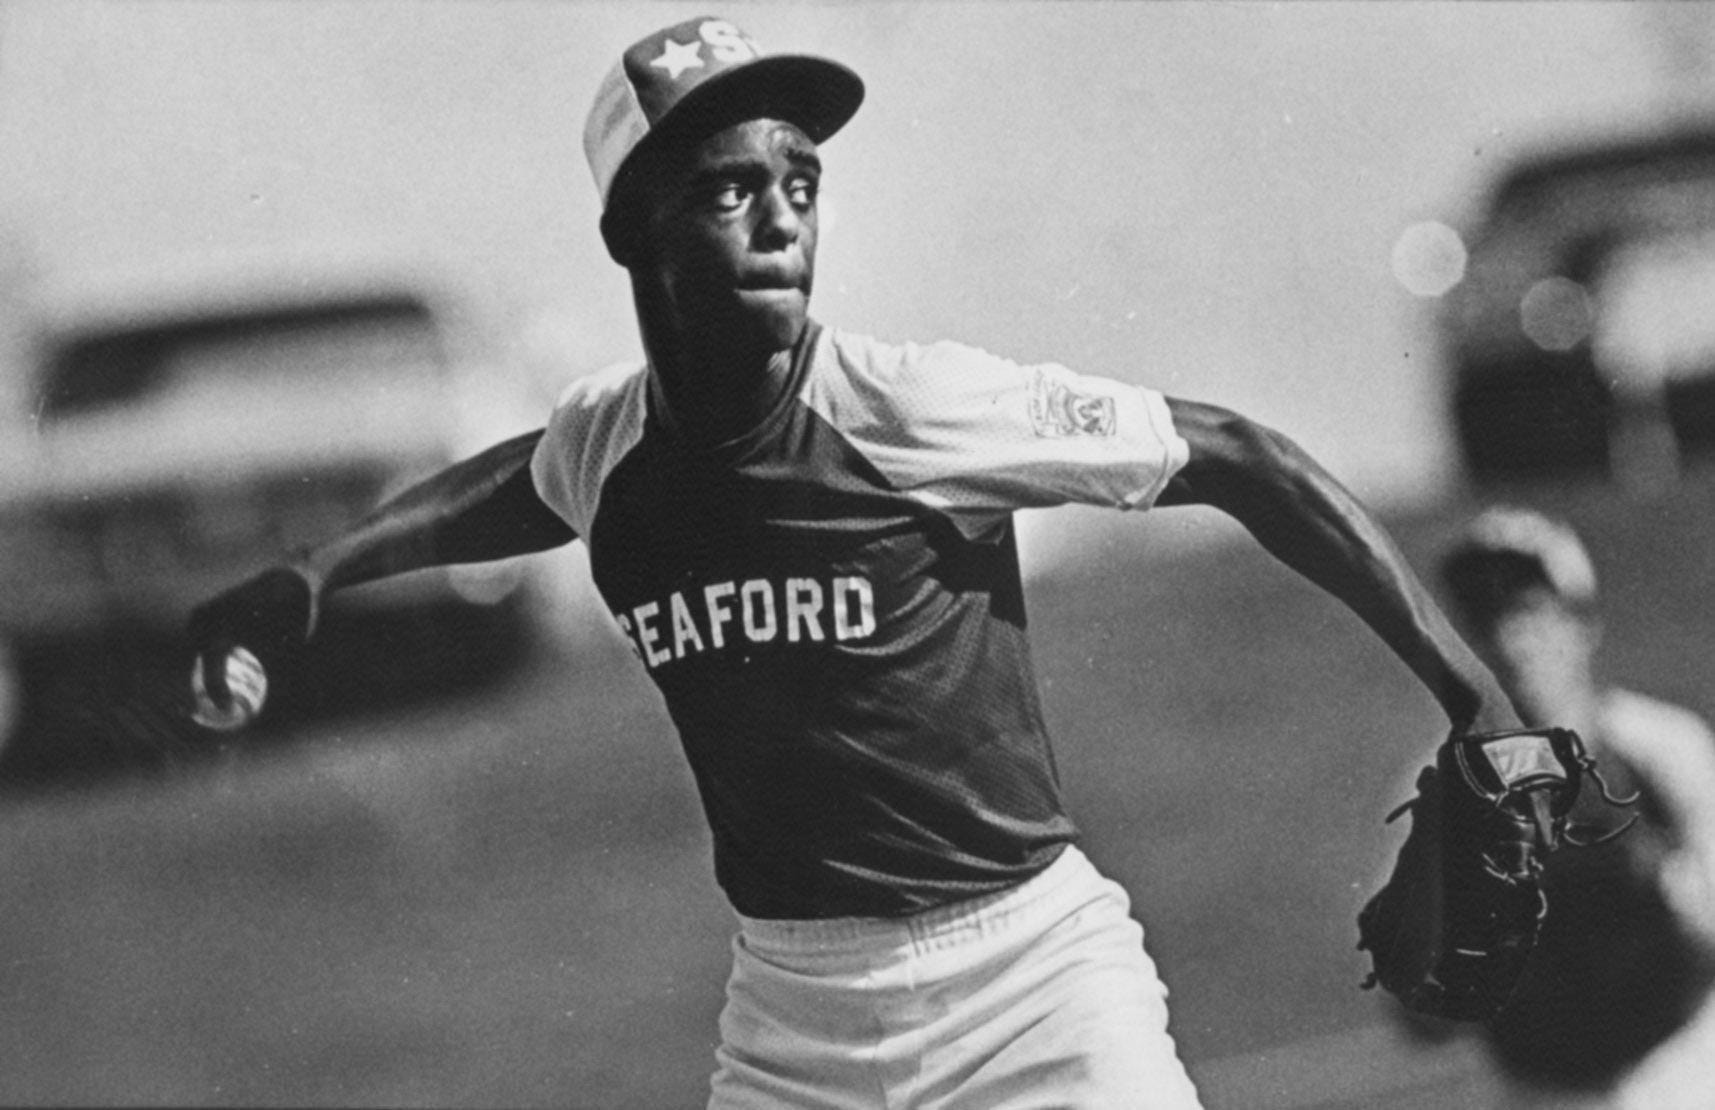 The News Journal
Delino DeShields pitches for a Seaford Little League All-Star team in 1984. DeShields went on to play in the majors for 13 seasons.
Delino Deshields pitches for a Seaford Little League All-Star team in 1984. Deshields went on to play in the majors for 13 seasons.